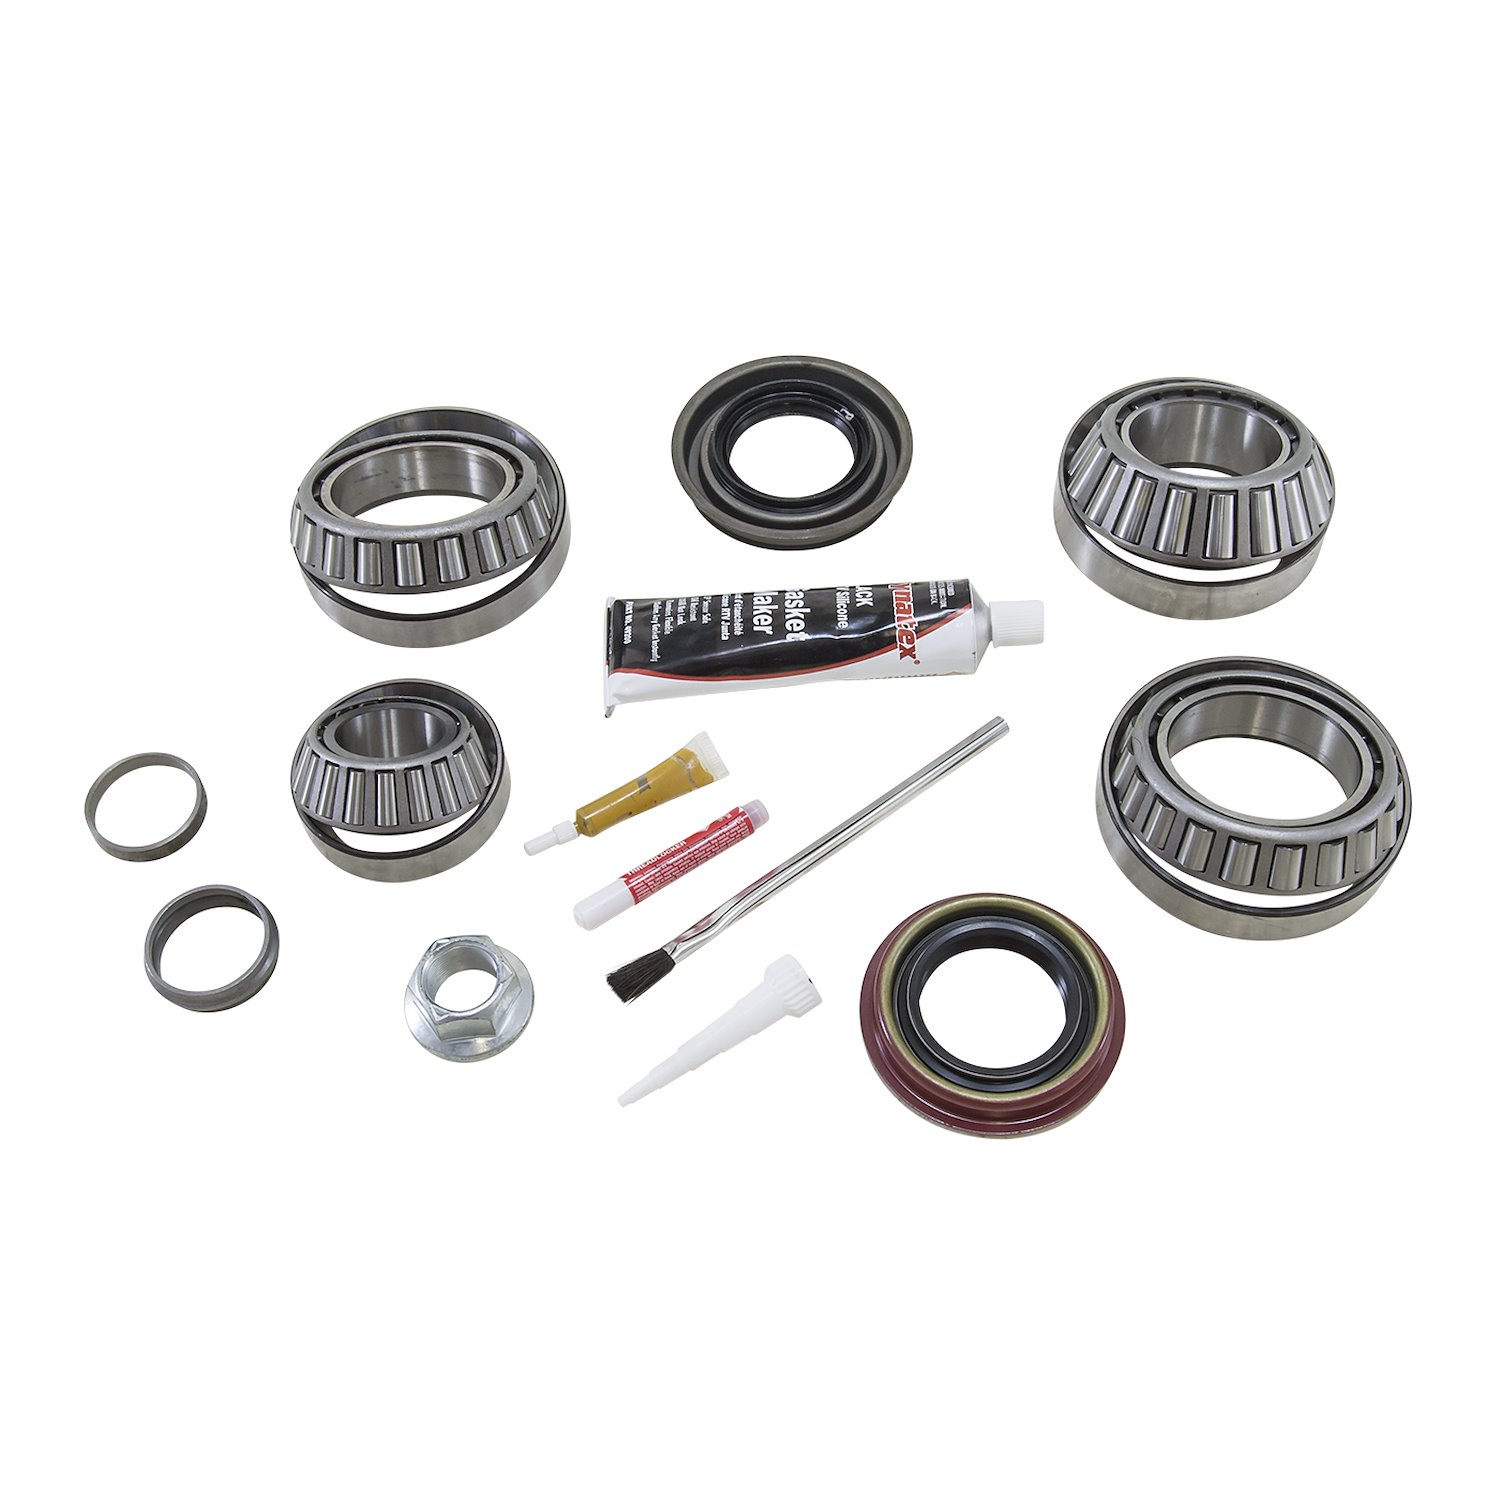 USA Standard ZBKF9.75A Bearing Kit, For '97-'98 Ford